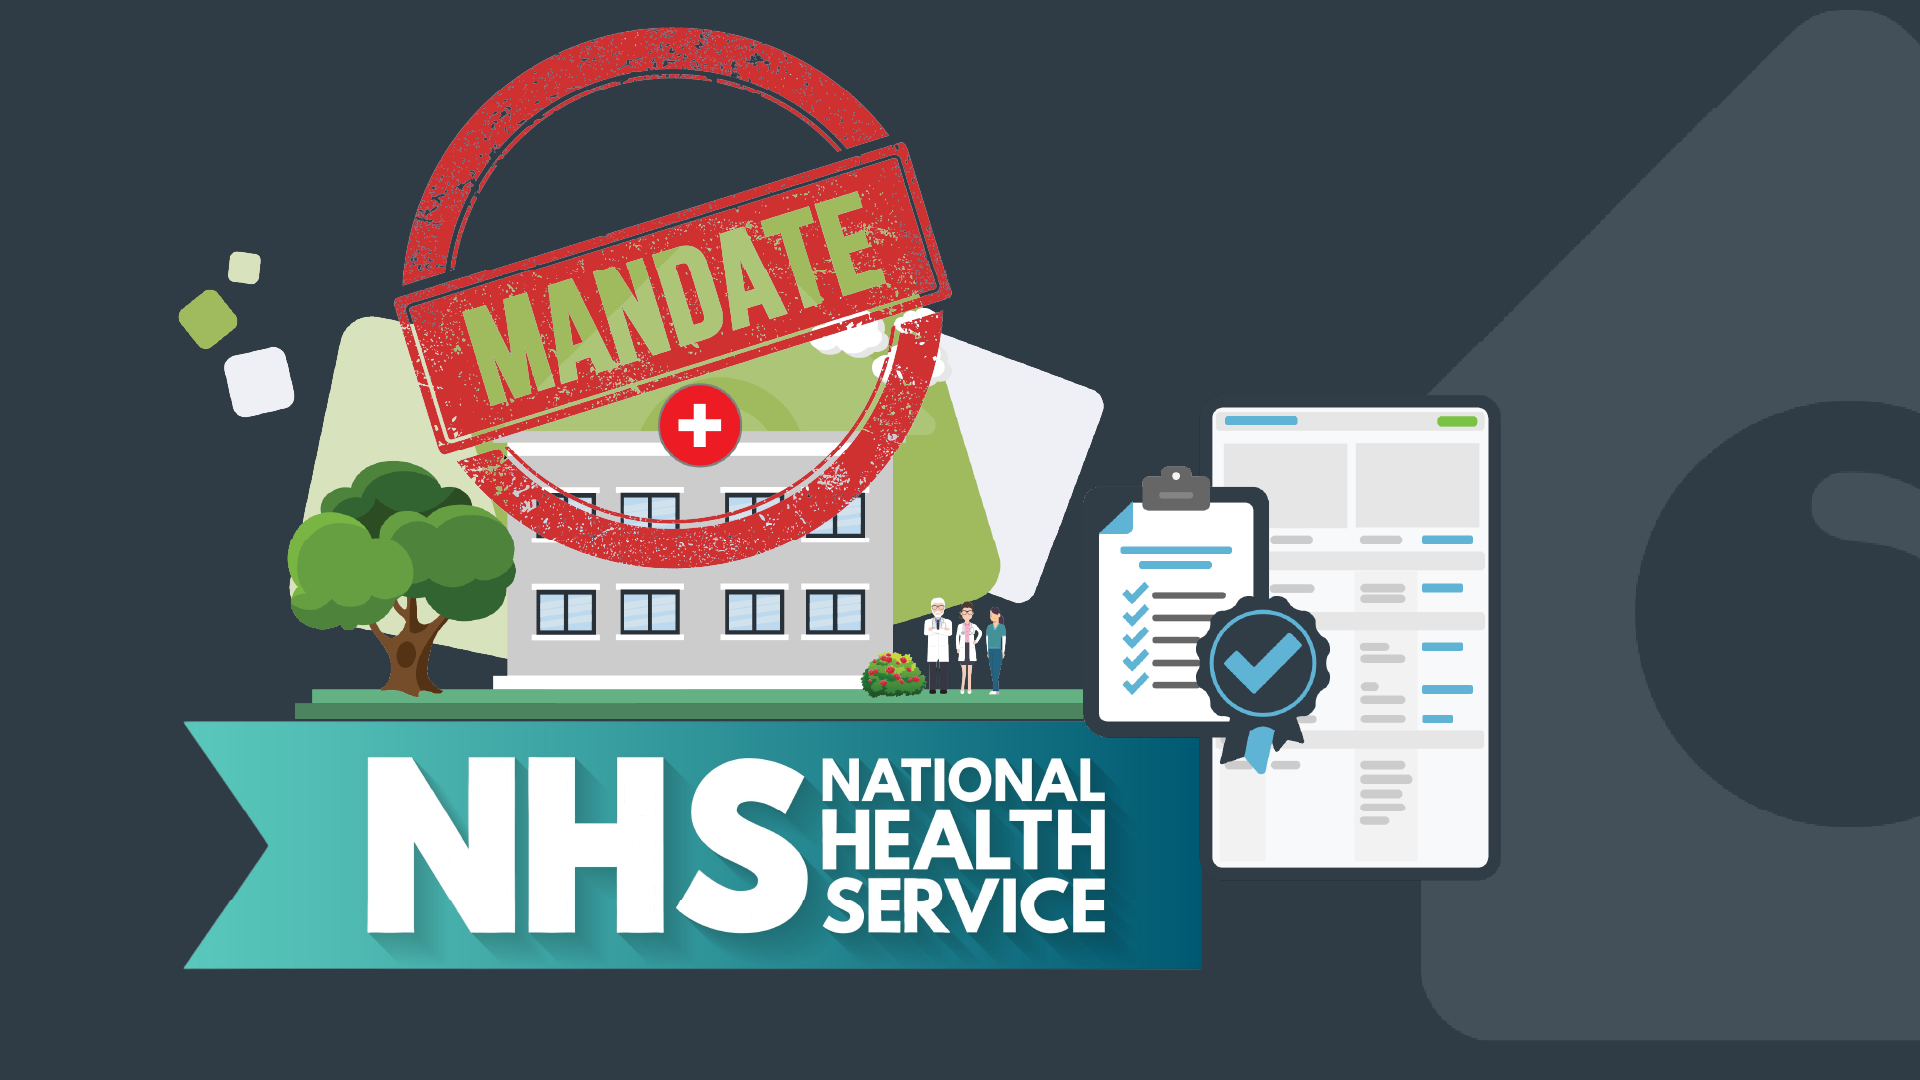 NHS Hygiene Mandate: The Importance of Digital Auditing in Healthcare Environments